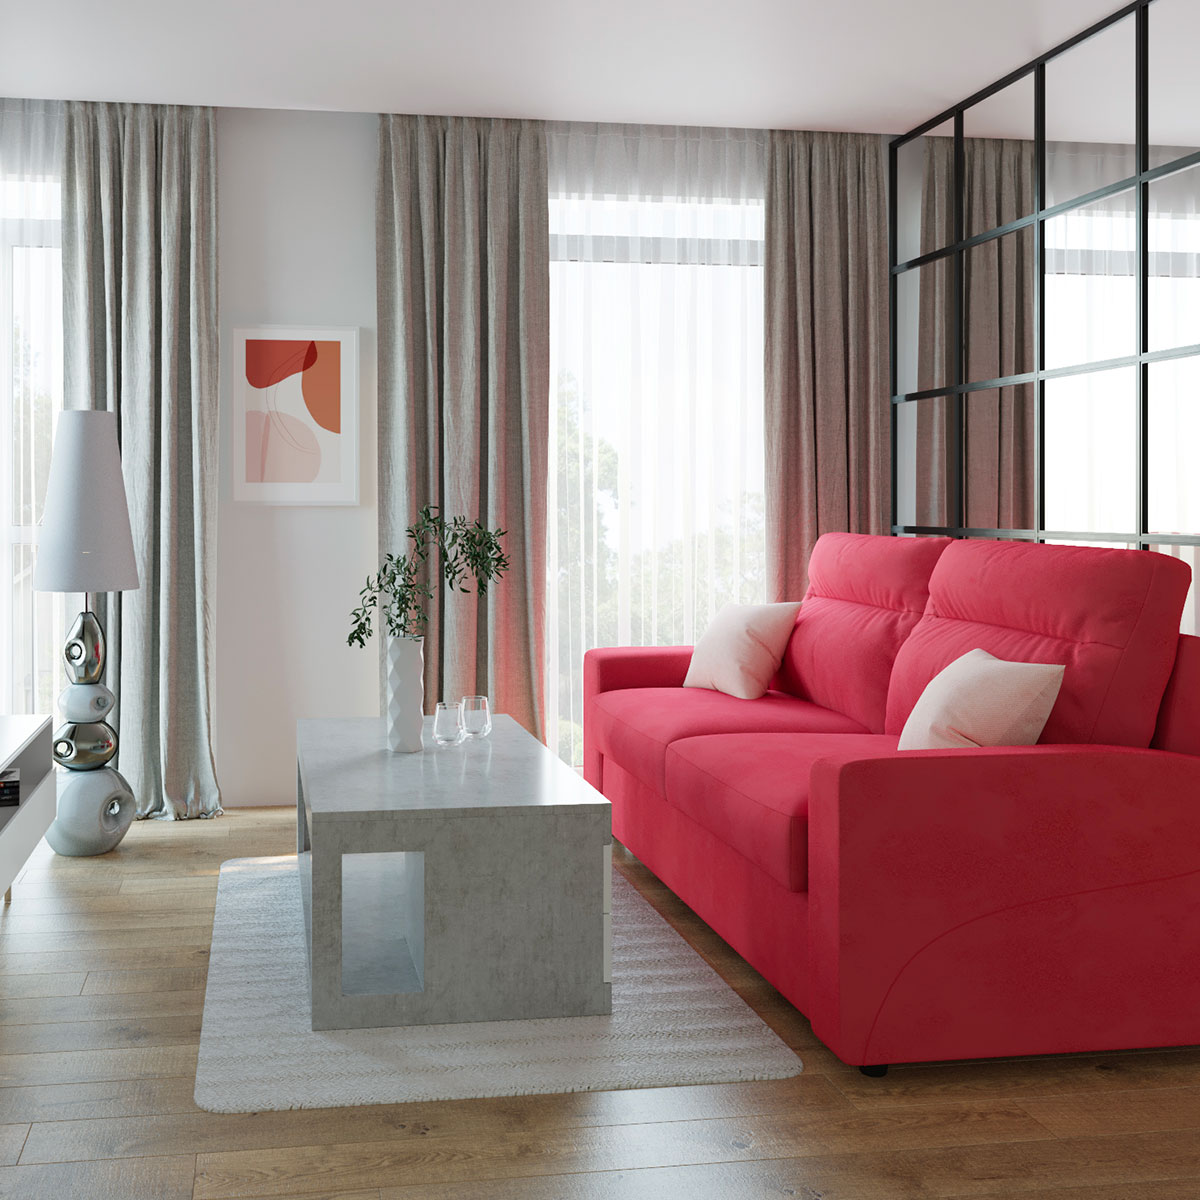 The Red and Gray Sofa 